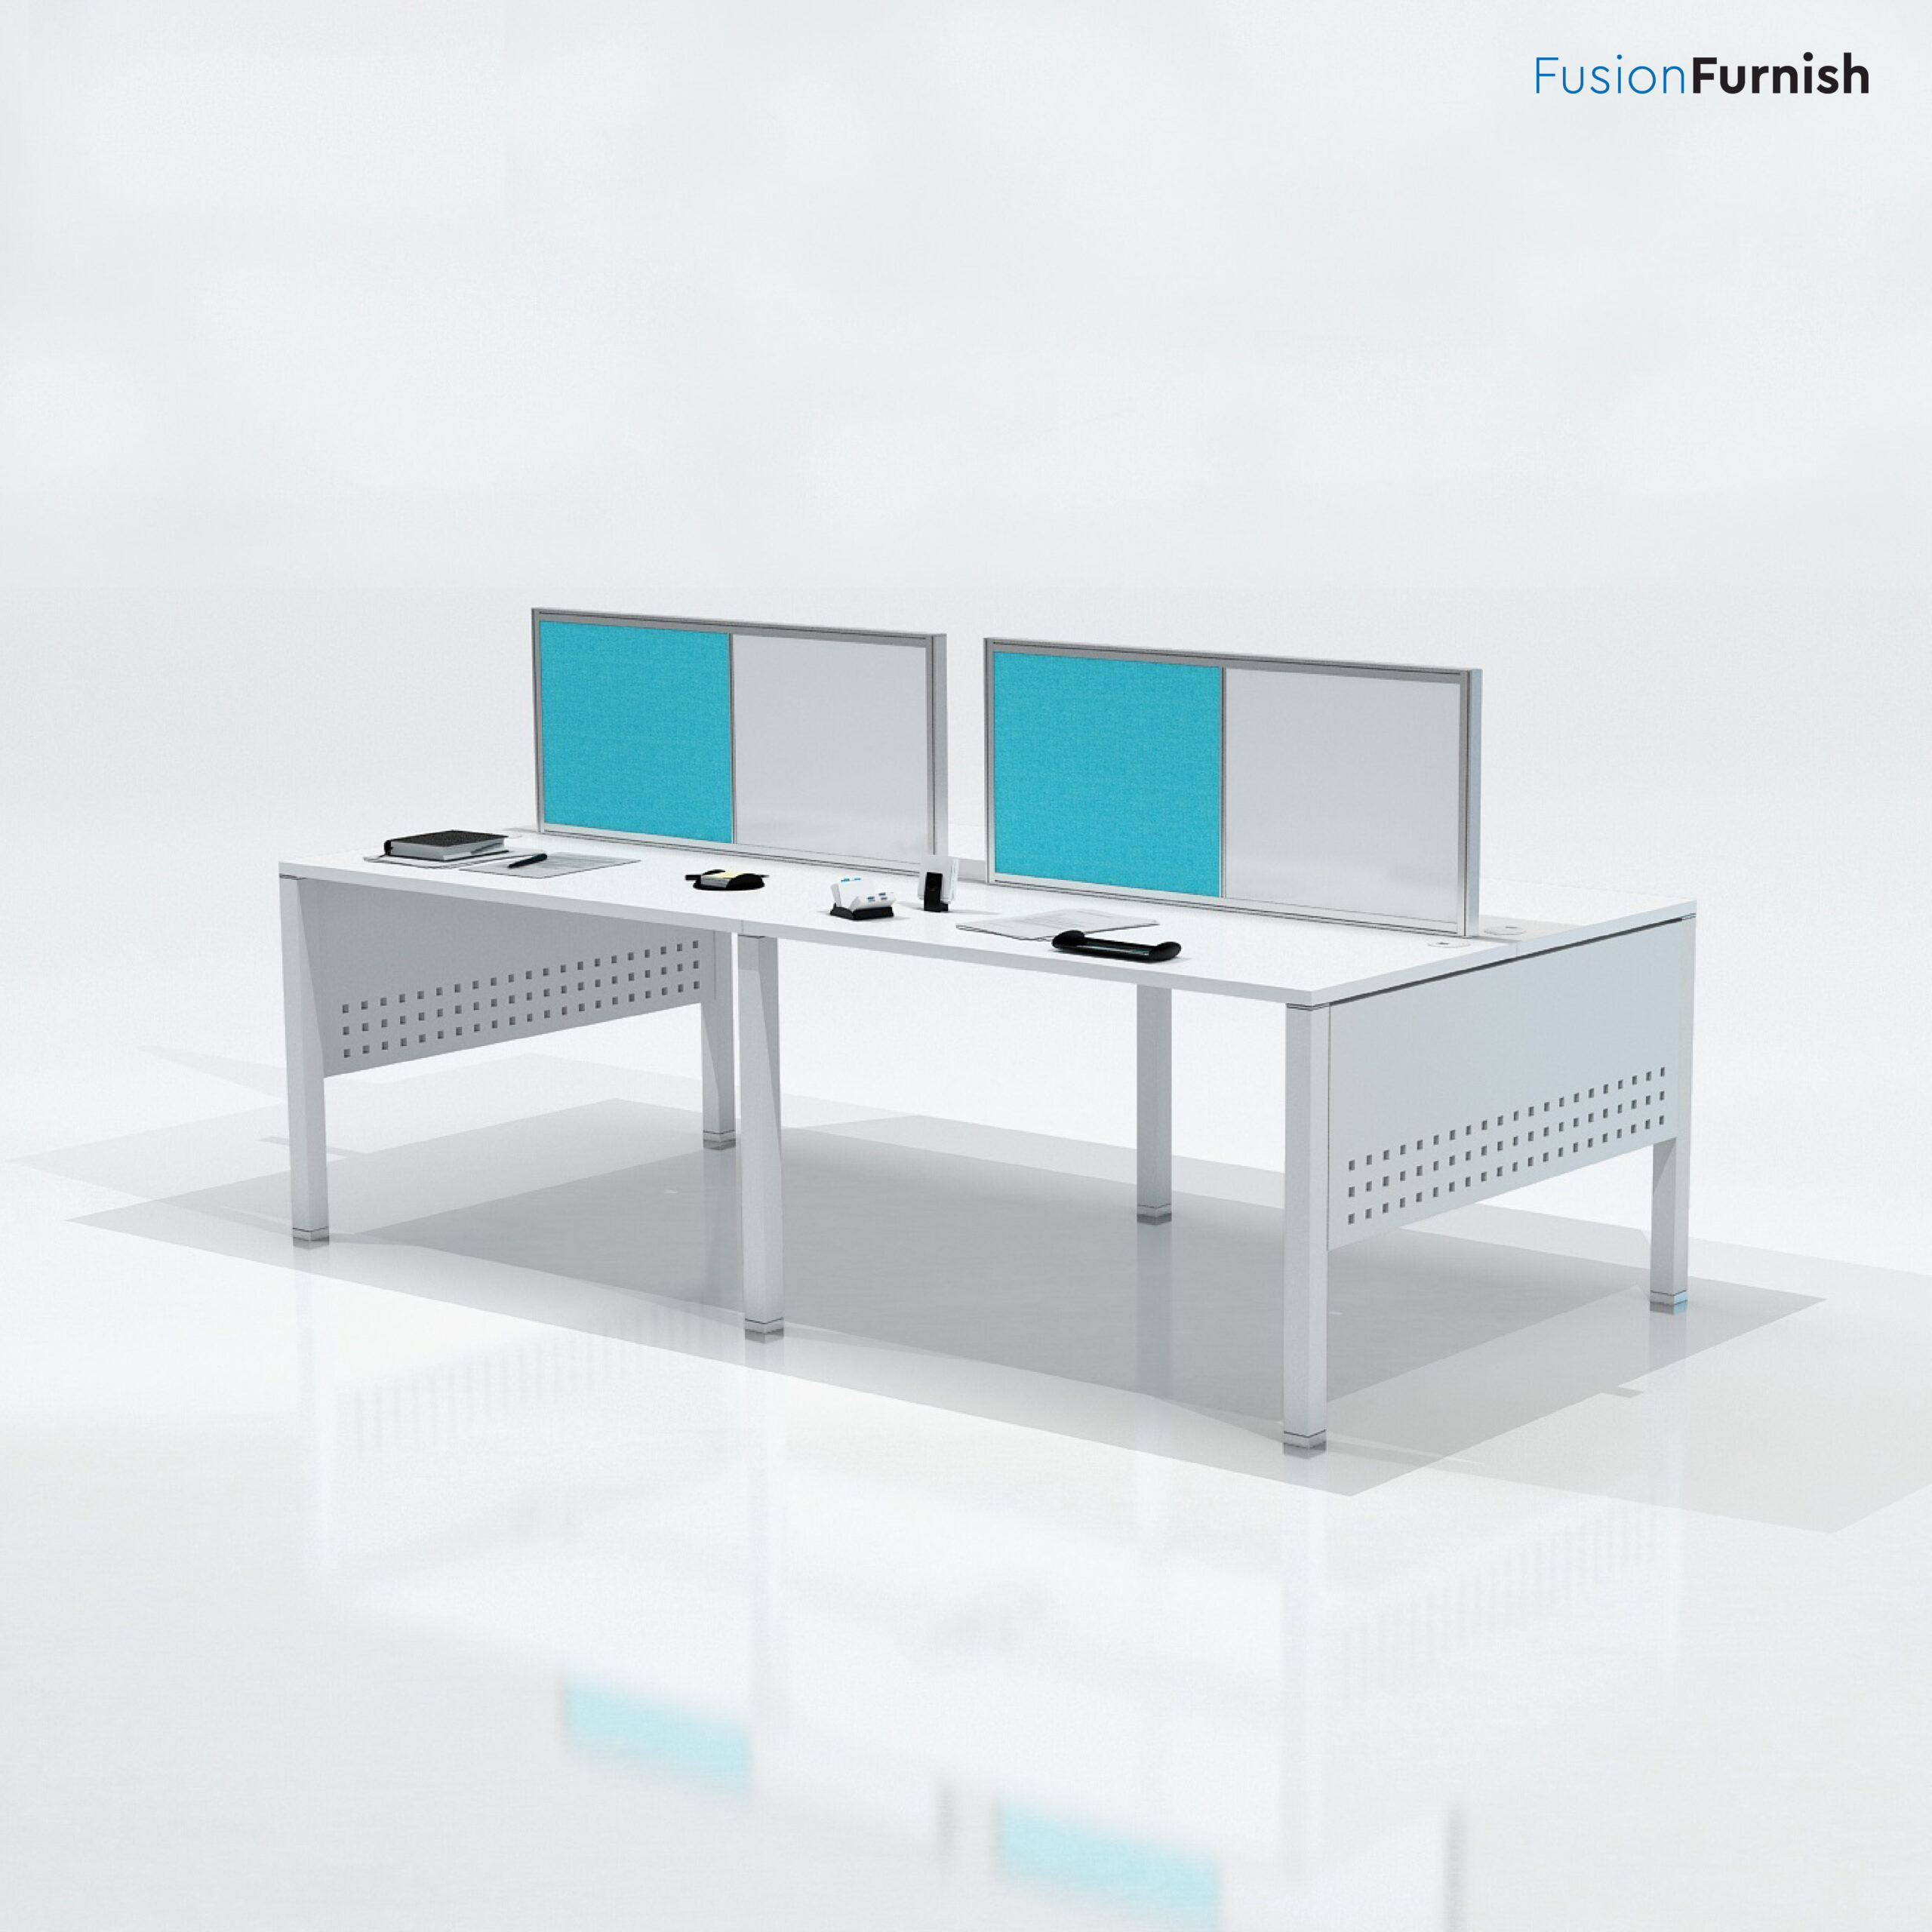 OD 01Contemporary workstations by Fusion Furnish are customizable and create a workspace great for individual and collaborative work.